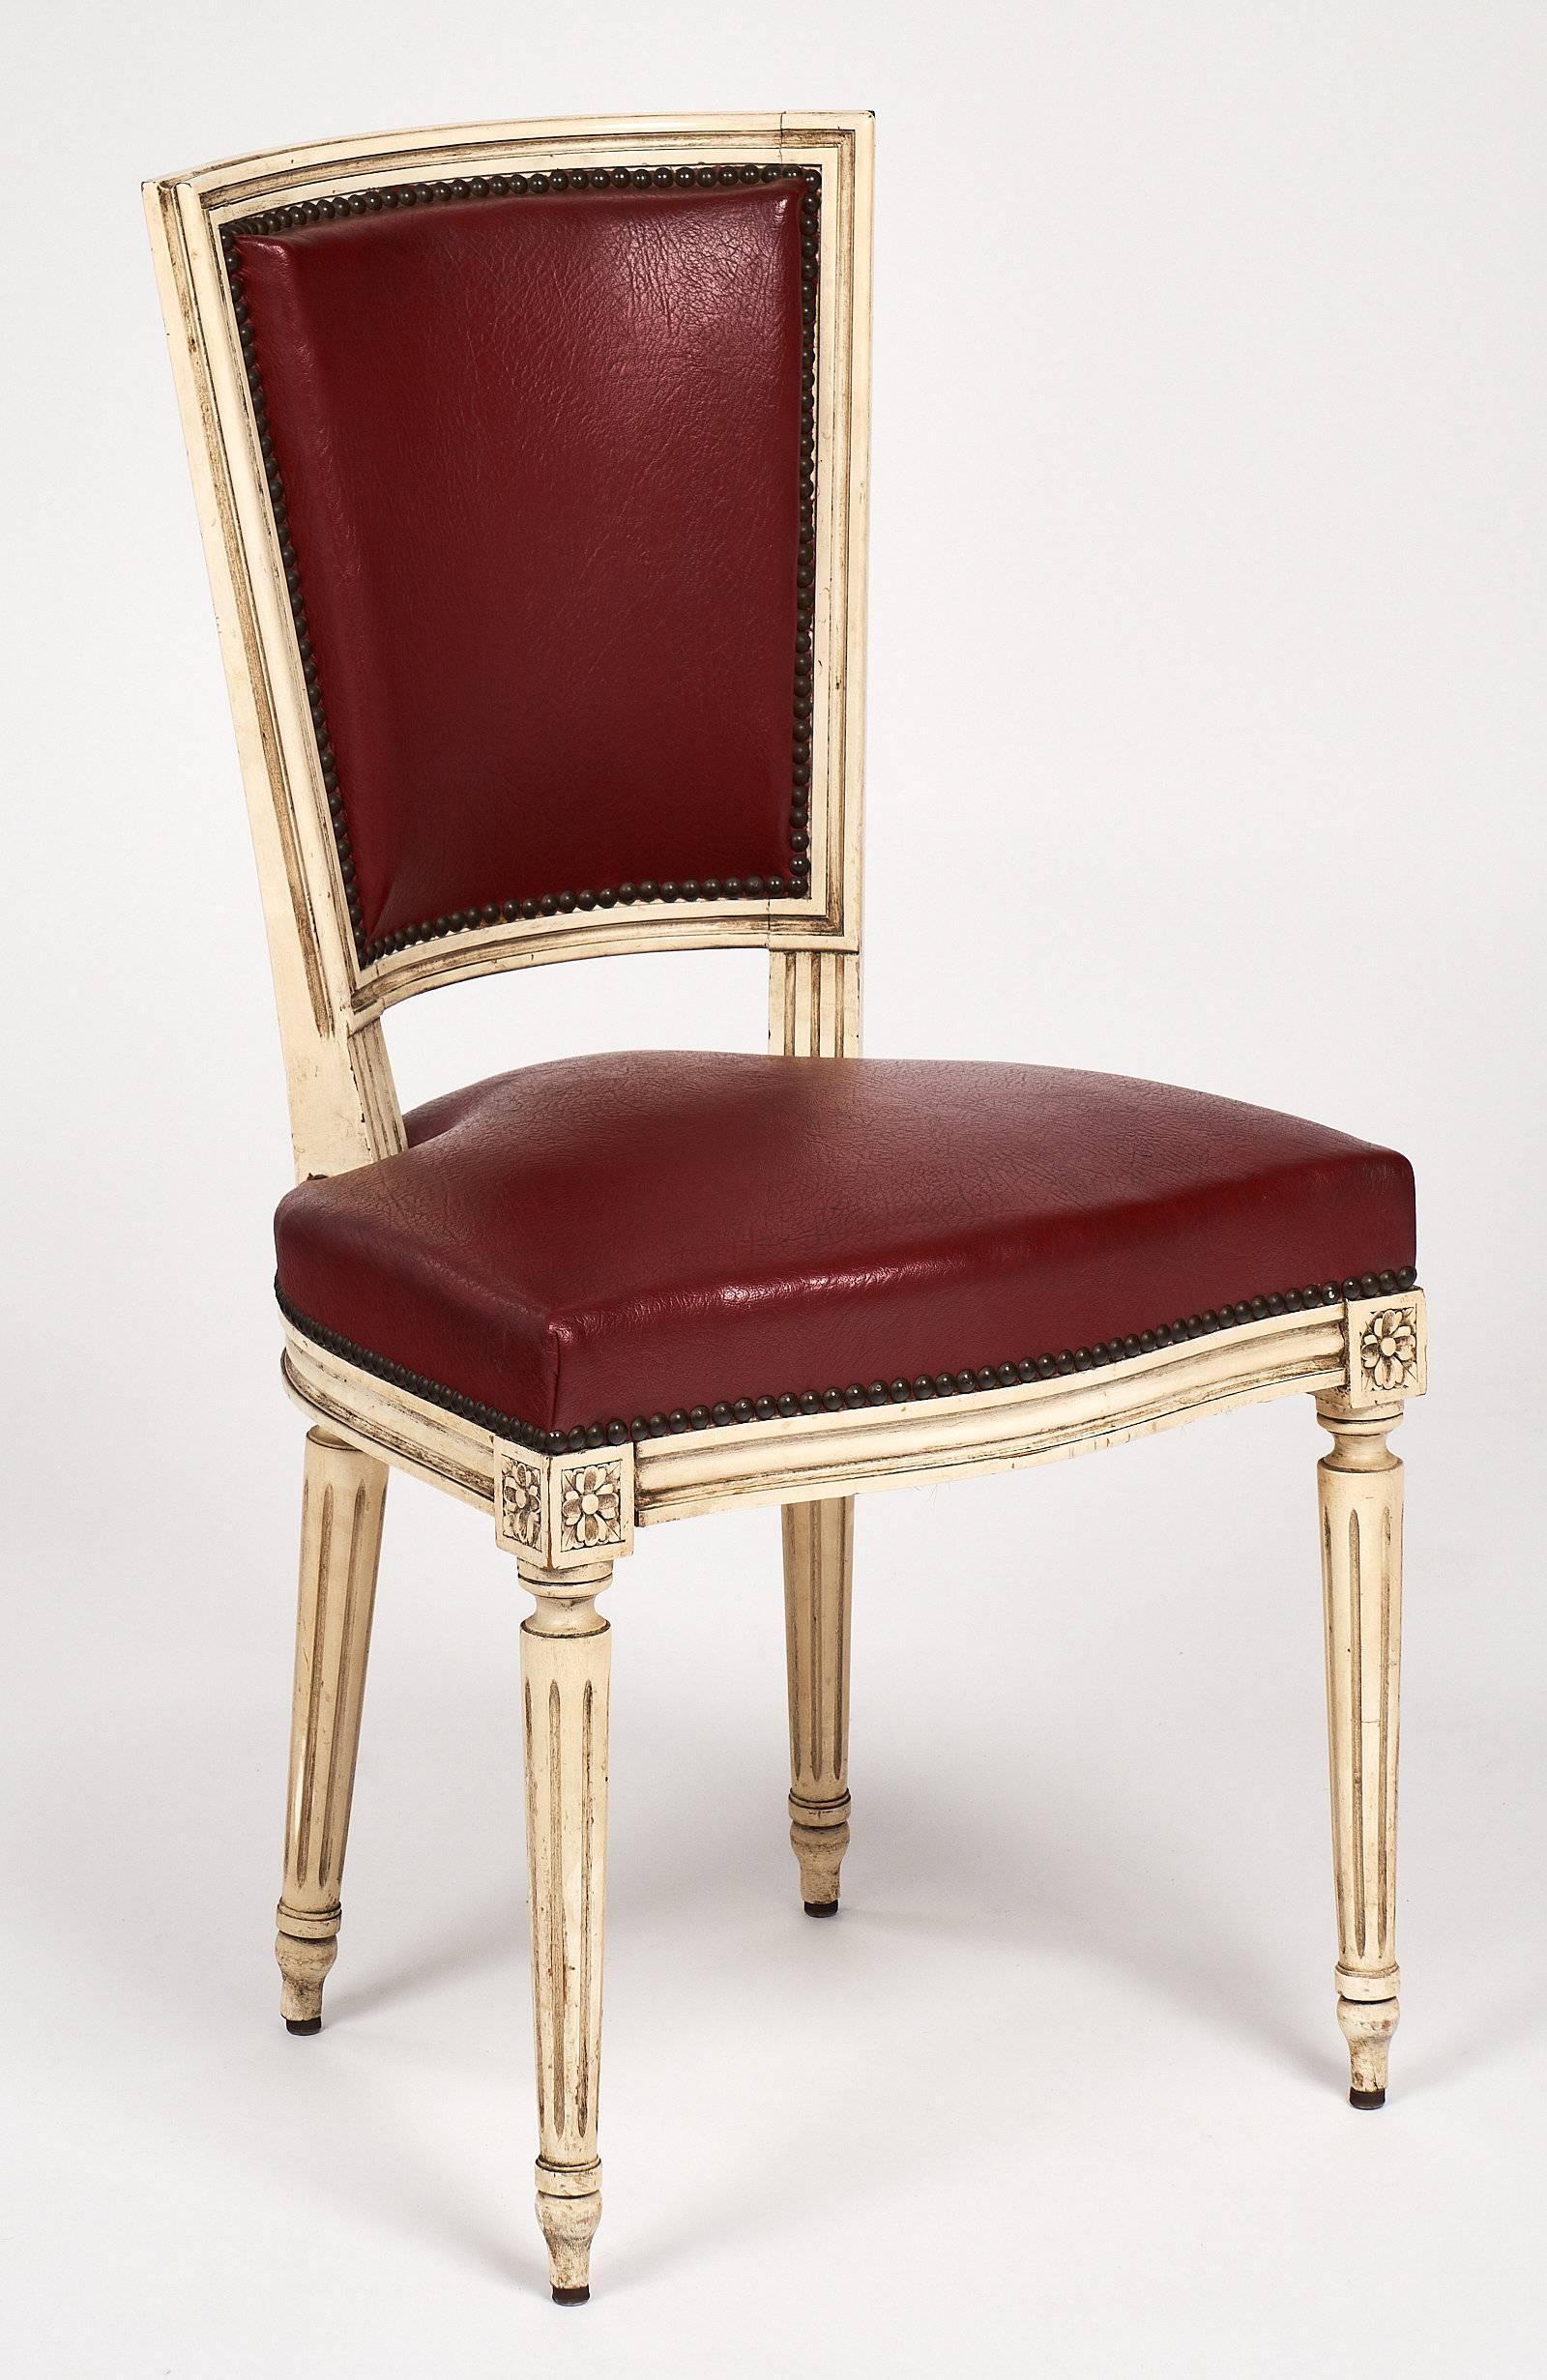 A fine Louis XVI style set of ten dining chairs with original “skaï